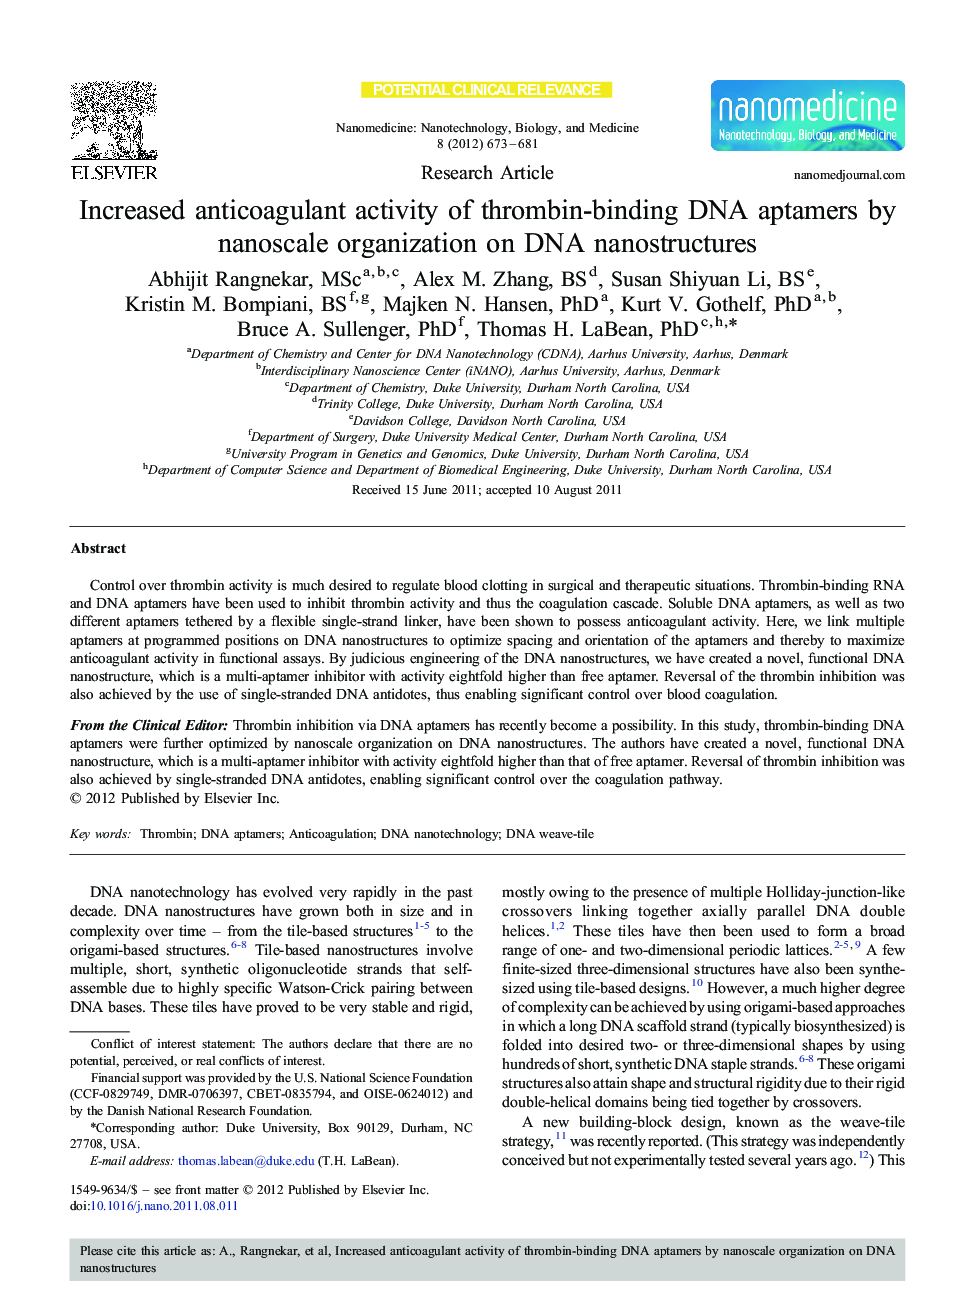 Increased anticoagulant activity of thrombin-binding DNA aptamers by nanoscale organization on DNA nanostructures 